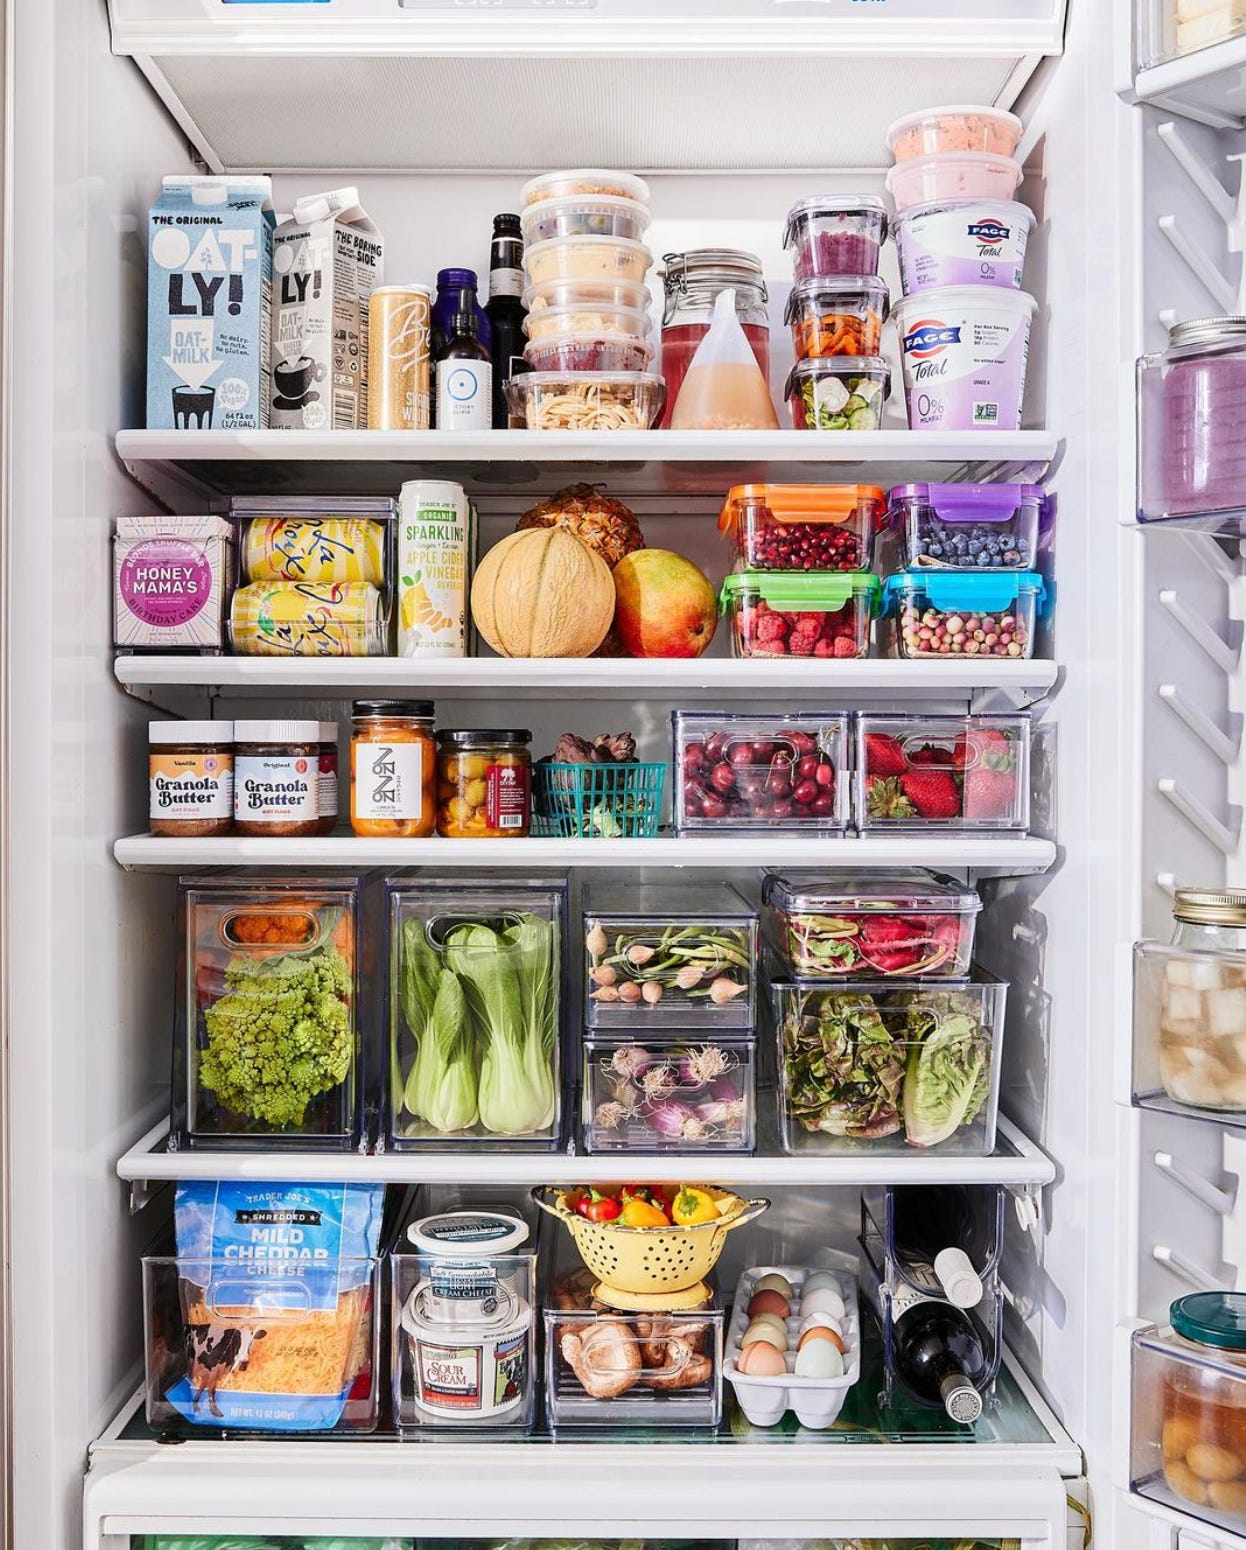 View inside of a well-stocked and organized refrigerator